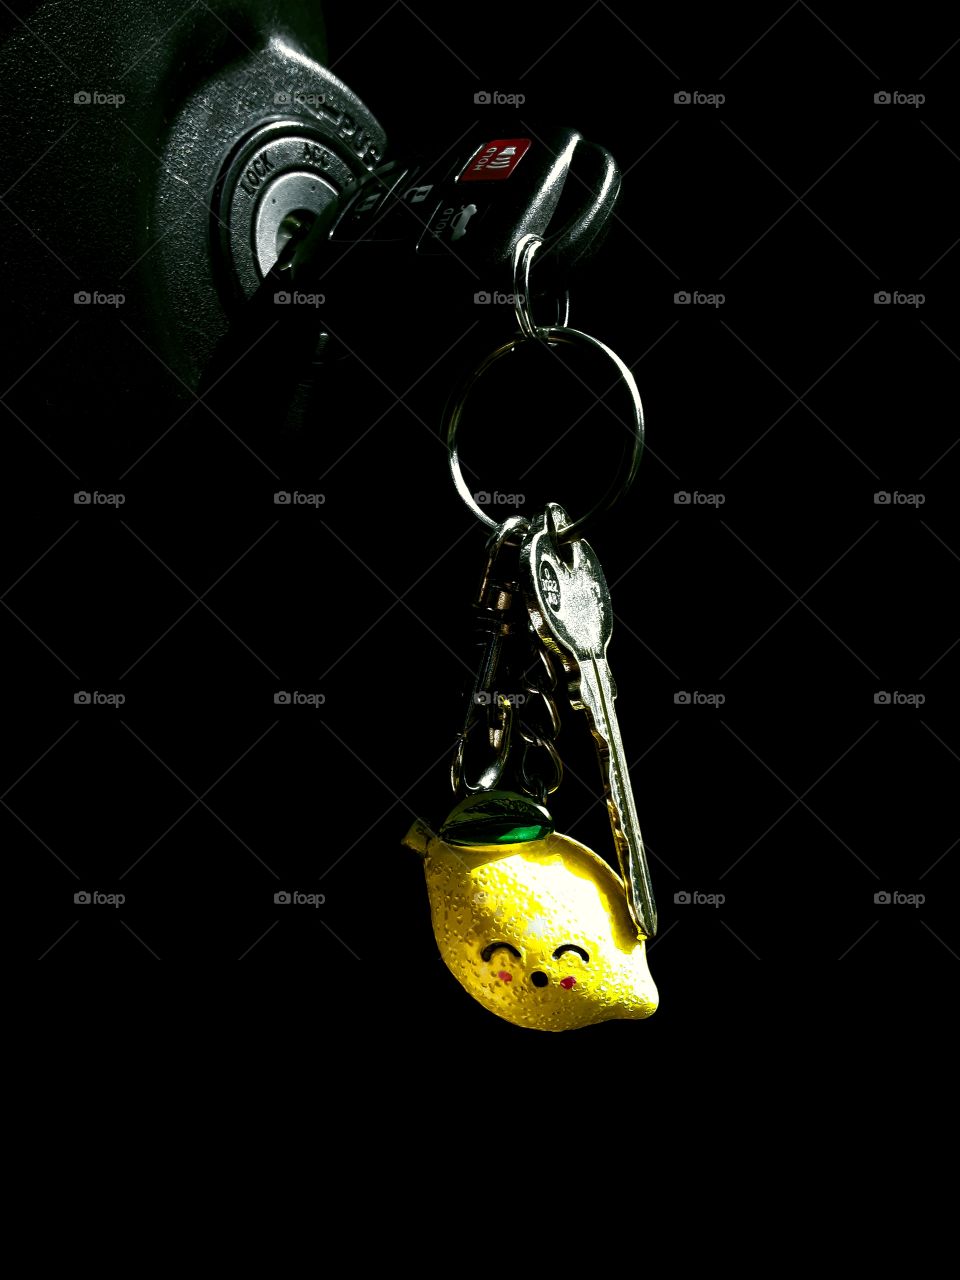 Keys in the ignition with key chain